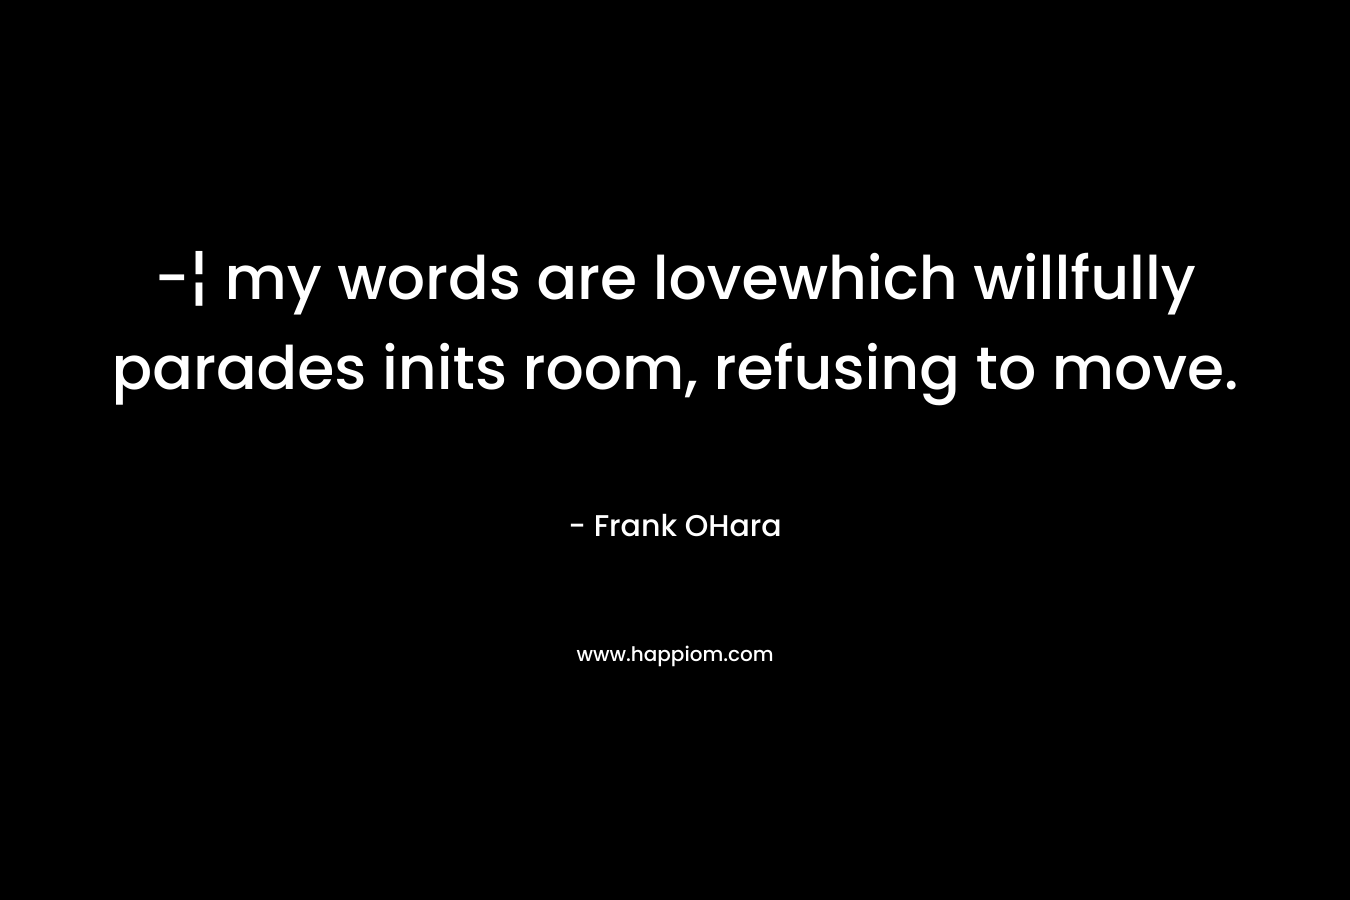 -¦ my words are lovewhich willfully parades inits room, refusing to move. – Frank OHara